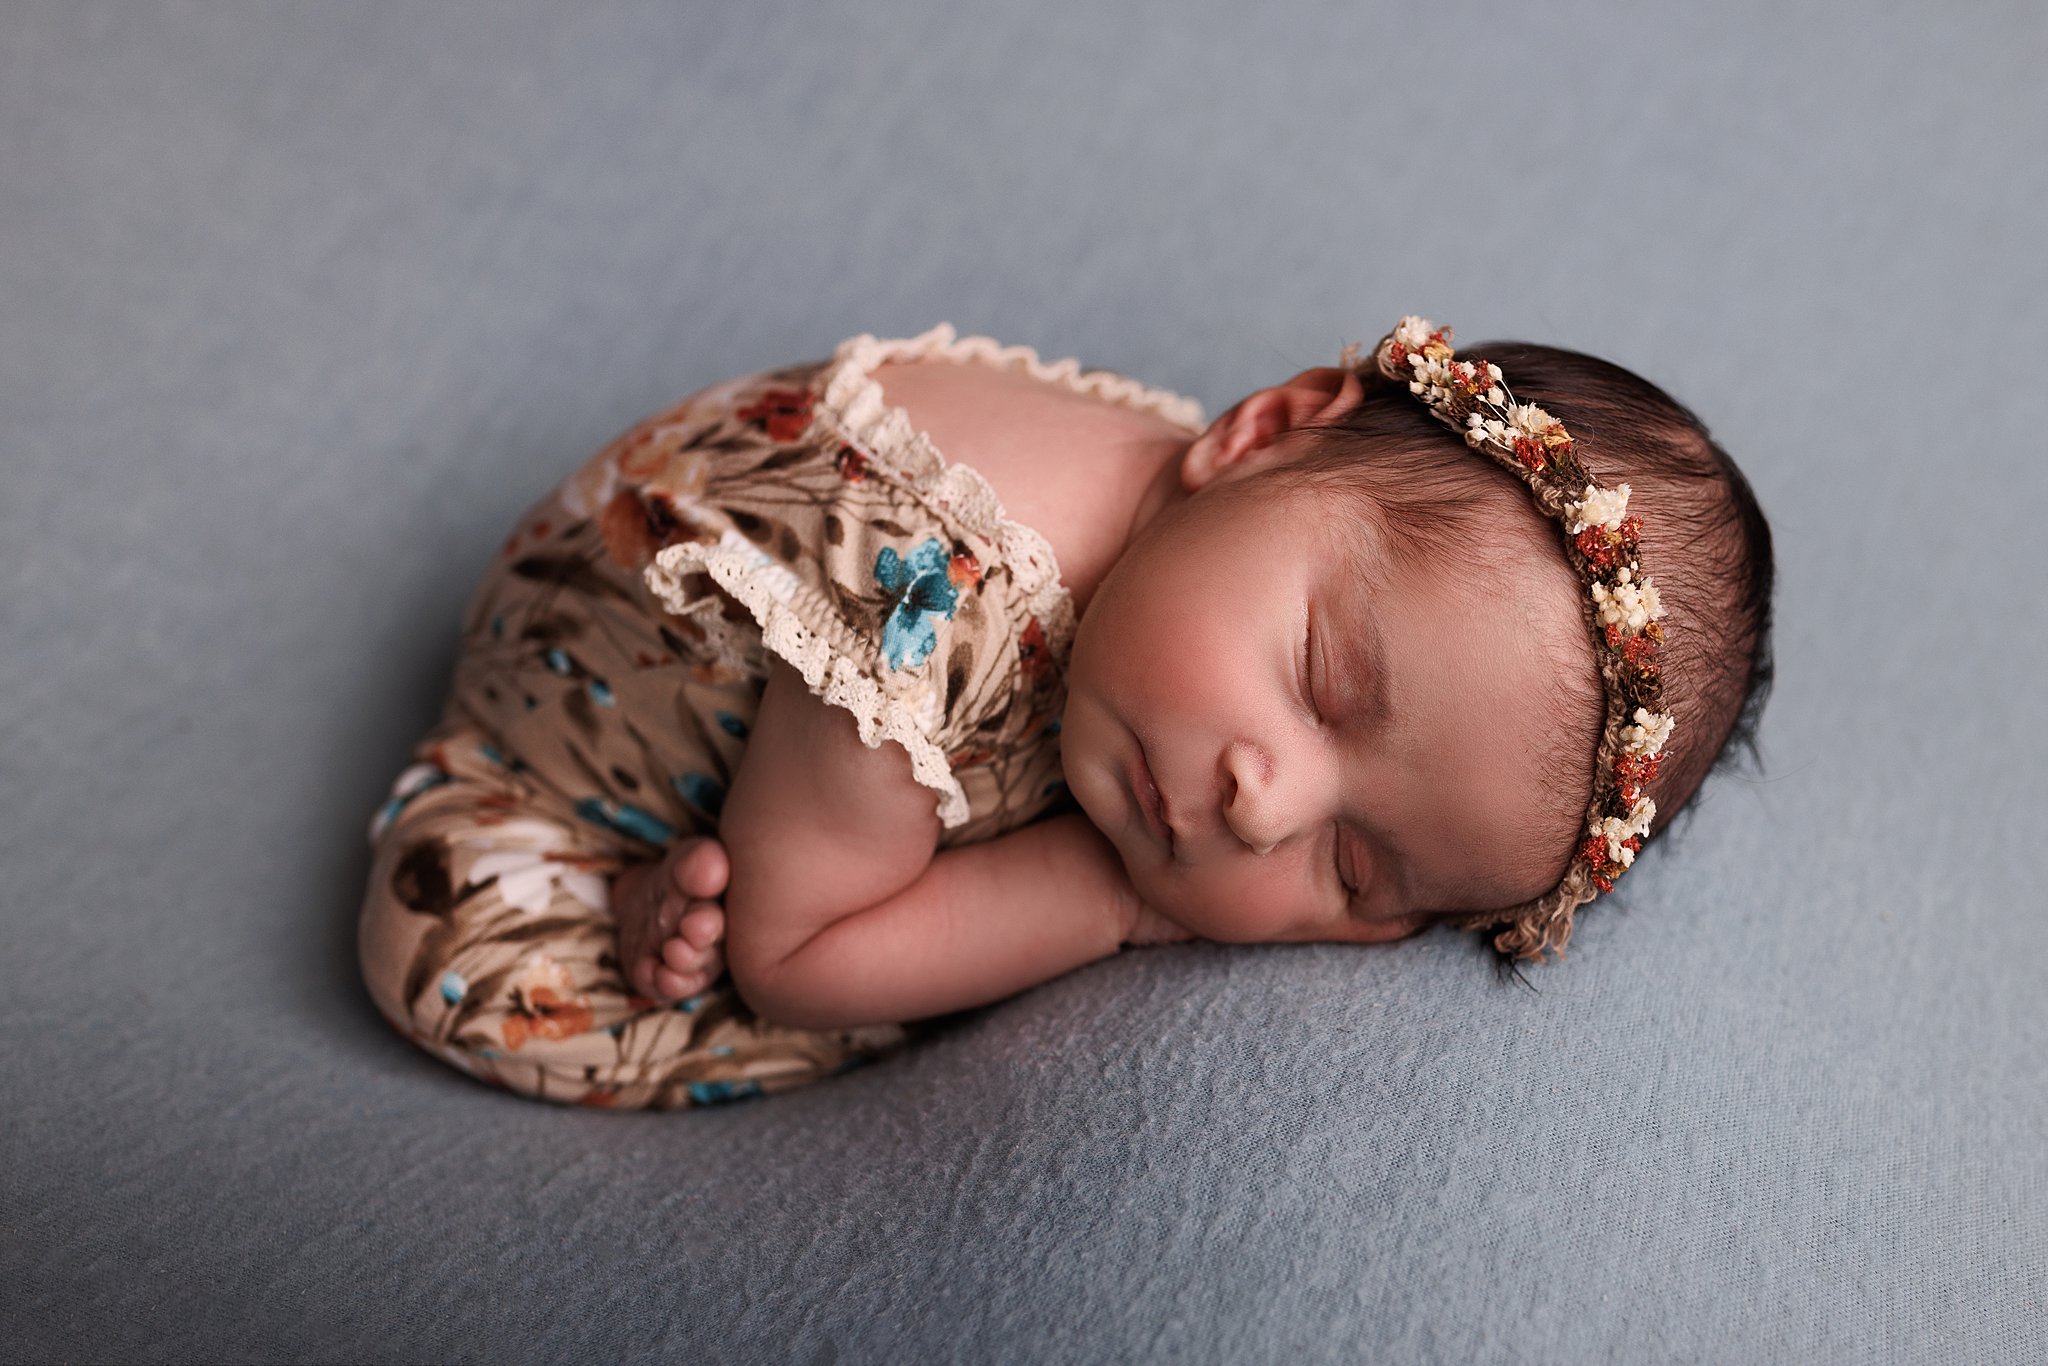 A newborn wearing a floral onesie with lace edges sleeps with legs crossed in a studio Toronto baby clothes